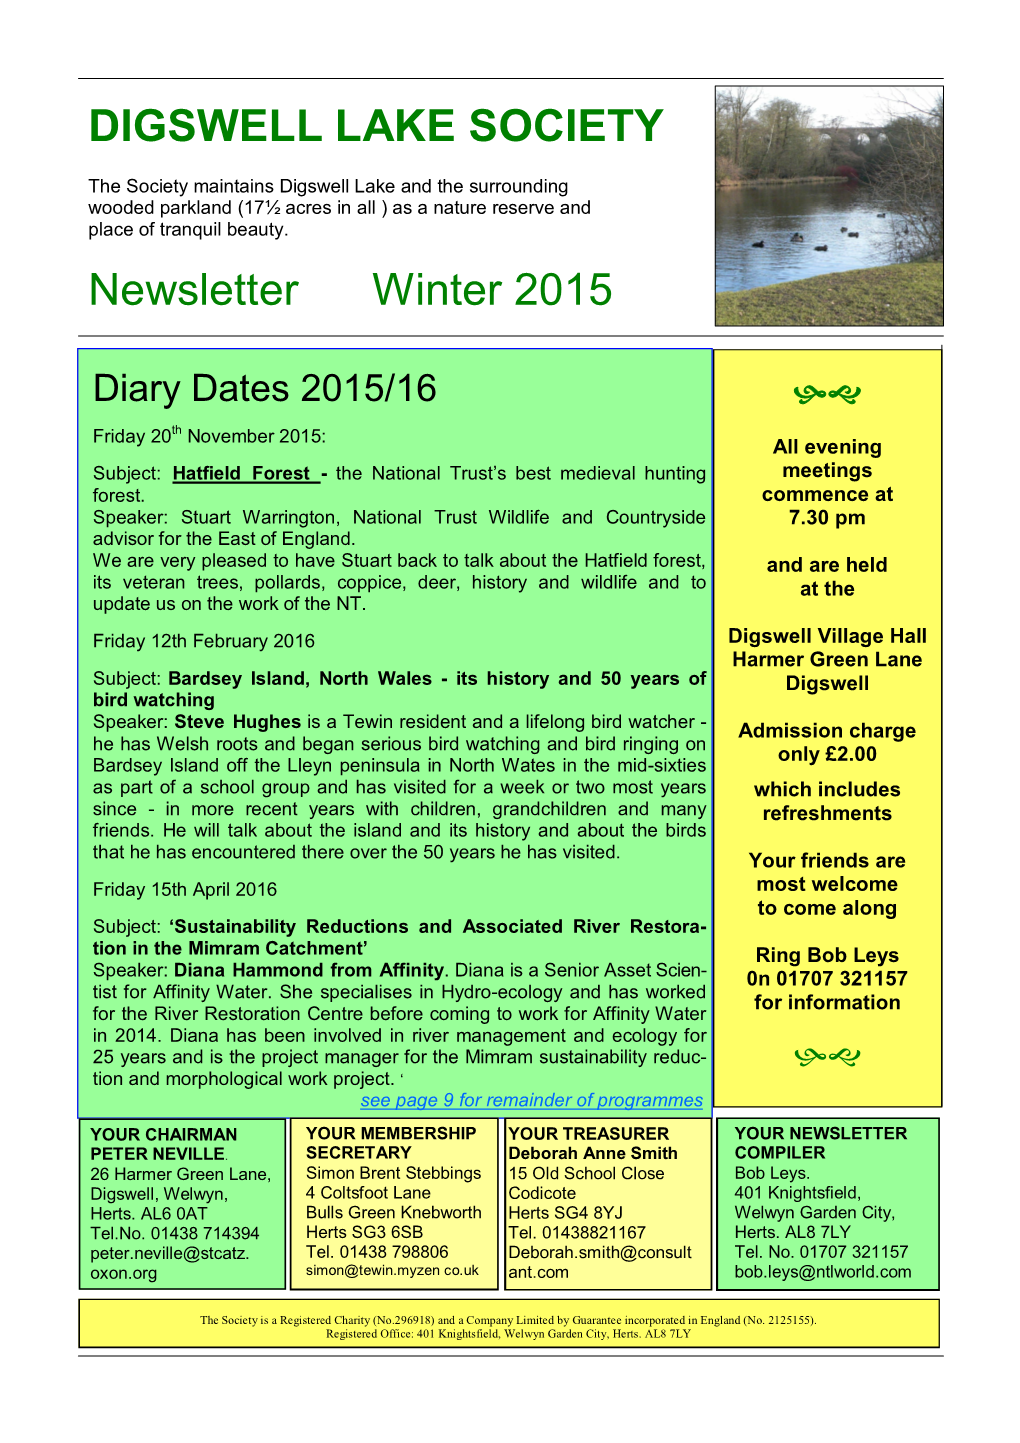 DIGSWELL LAKE SOCIETY Newsletter Winter 2015